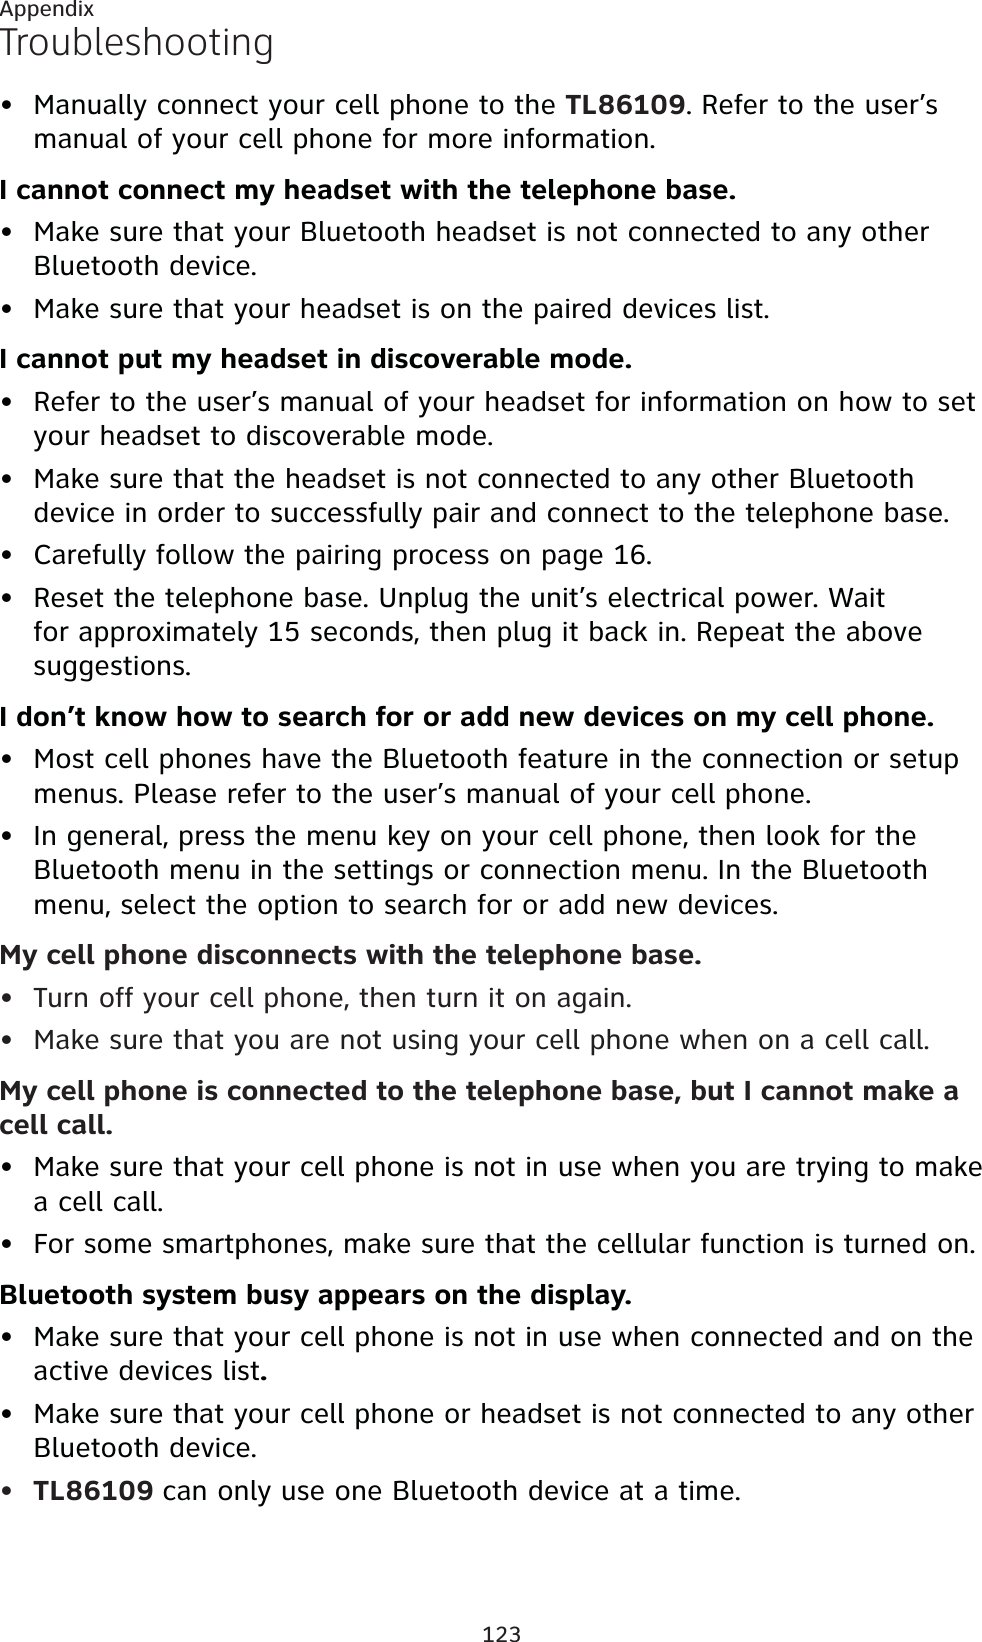 123AppendixTroubleshootingManually connect your cell phone to the TL86109. Refer to the user’s manual of your cell phone for more information.I cannot connect my headset with the telephone base.Make sure that your Bluetooth headset is not connected to any other Bluetooth device.Make sure that your headset is on the paired devices list.I cannot put my headset in discoverable mode.Refer to the user’s manual of your headset for information on how to set your headset to discoverable mode.Make sure that the headset is not connected to any other Bluetooth device in order to successfully pair and connect to the telephone base.Carefully follow the pairing process on page 16.Reset the telephone base. Unplug the unit’s electrical power. Wait for approximately 15 seconds, then plug it back in. Repeat the above suggestions.I don’t know how to search for or add new devices on my cell phone.Most cell phones have the Bluetooth feature in the connection or setup menus. Please refer to the user’s manual of your cell phone.In general, press the menu key on your cell phone, then look for the Bluetooth menu in the settings or connection menu. In the Bluetooth menu, select the option to search for or add new devices.My cell phone disconnects with the telephone base.Turn off your cell phone, then turn it on again.Make sure that you are not using your cell phone when on a cell call.My cell phone is connected to the telephone base, but I cannot make a cell call.Make sure that your cell phone is not in use when you are trying to make a cell call.For some smartphones, make sure that the cellular function is turned on.Bluetooth system busy appears on the display.Make sure that your cell phone is not in use when connected and on the active devices list.Make sure that your cell phone or headset is not connected to any other Bluetooth device.TL86109 can only use one Bluetooth device at a time.••••••••••••••••